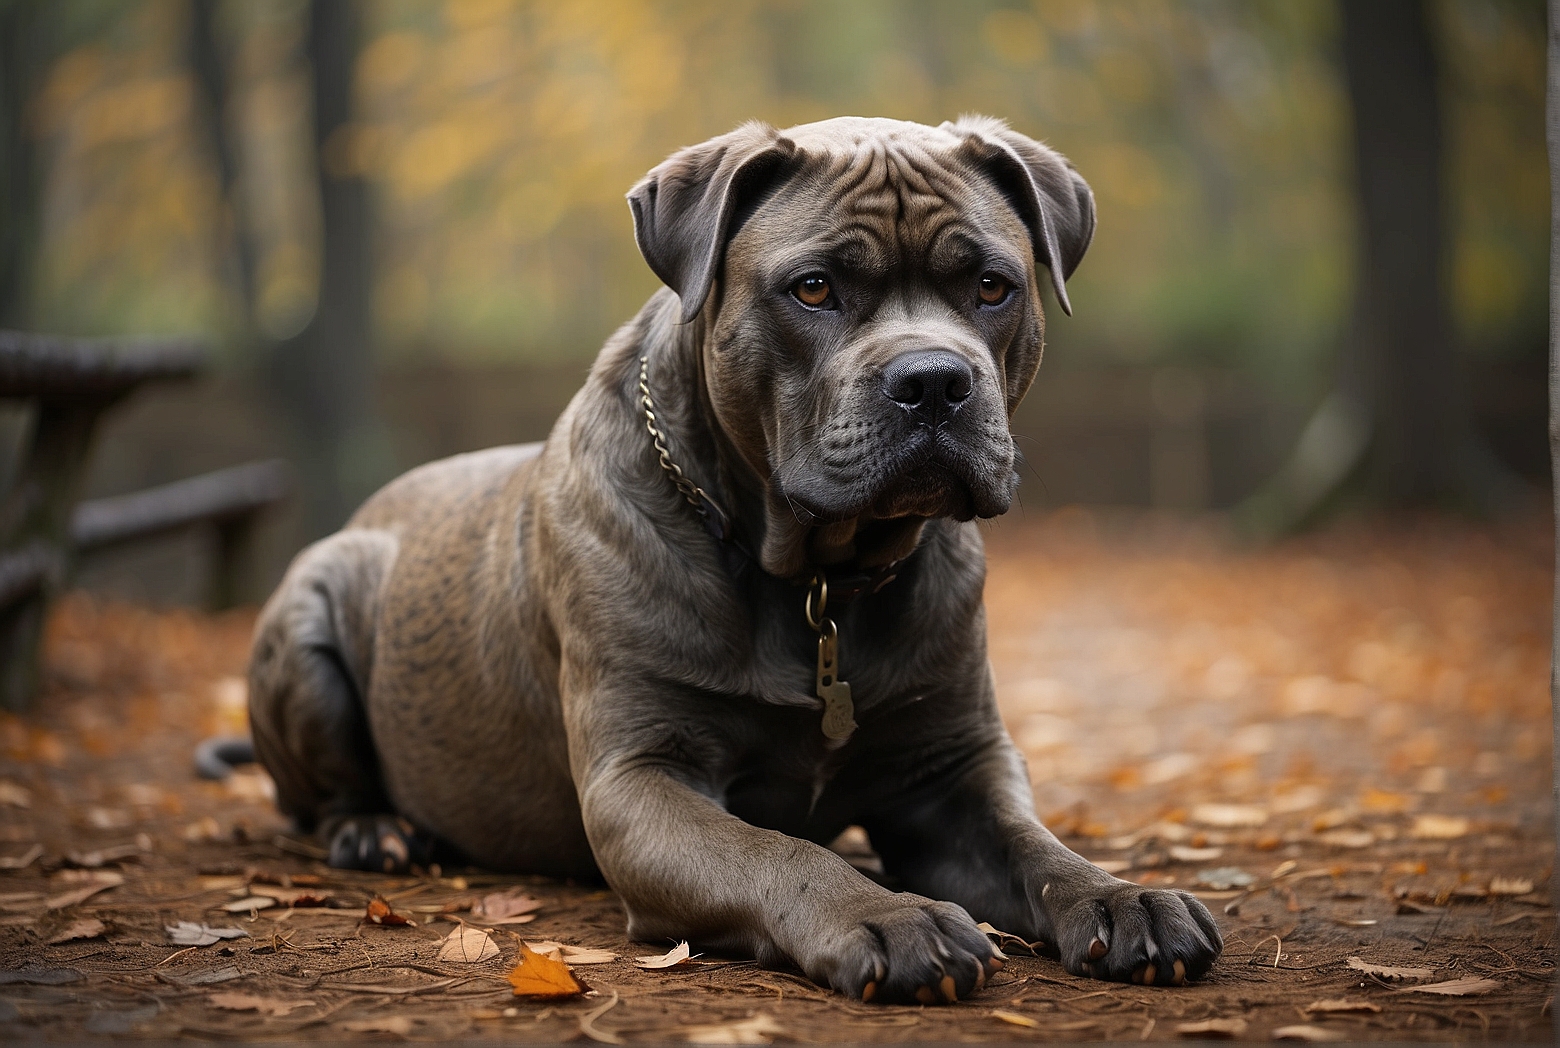 Can a Cane Corso be left alone?